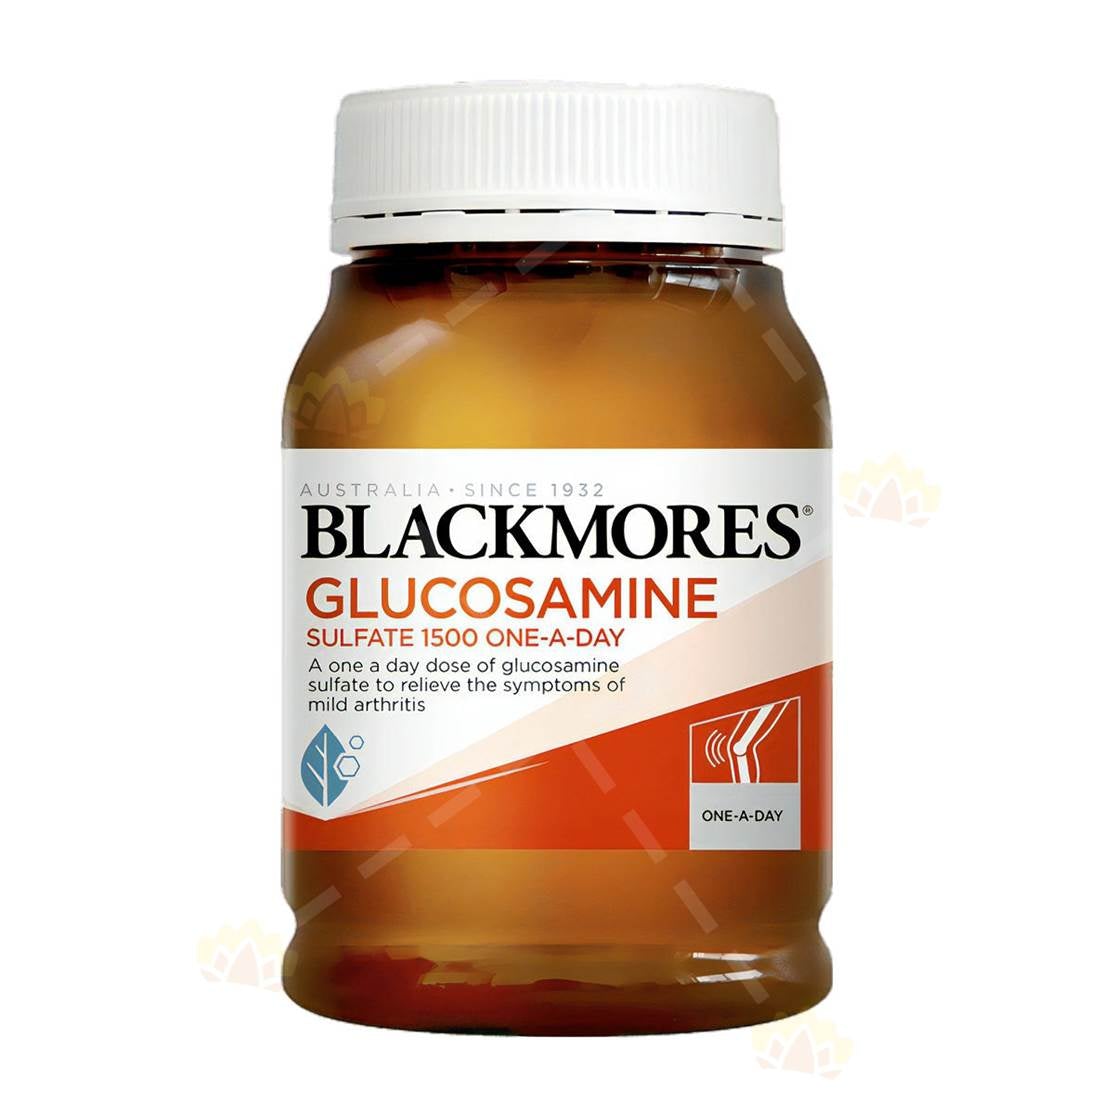 blackmores-glucosamine-sulfate-1500-one-a-day-180tablets